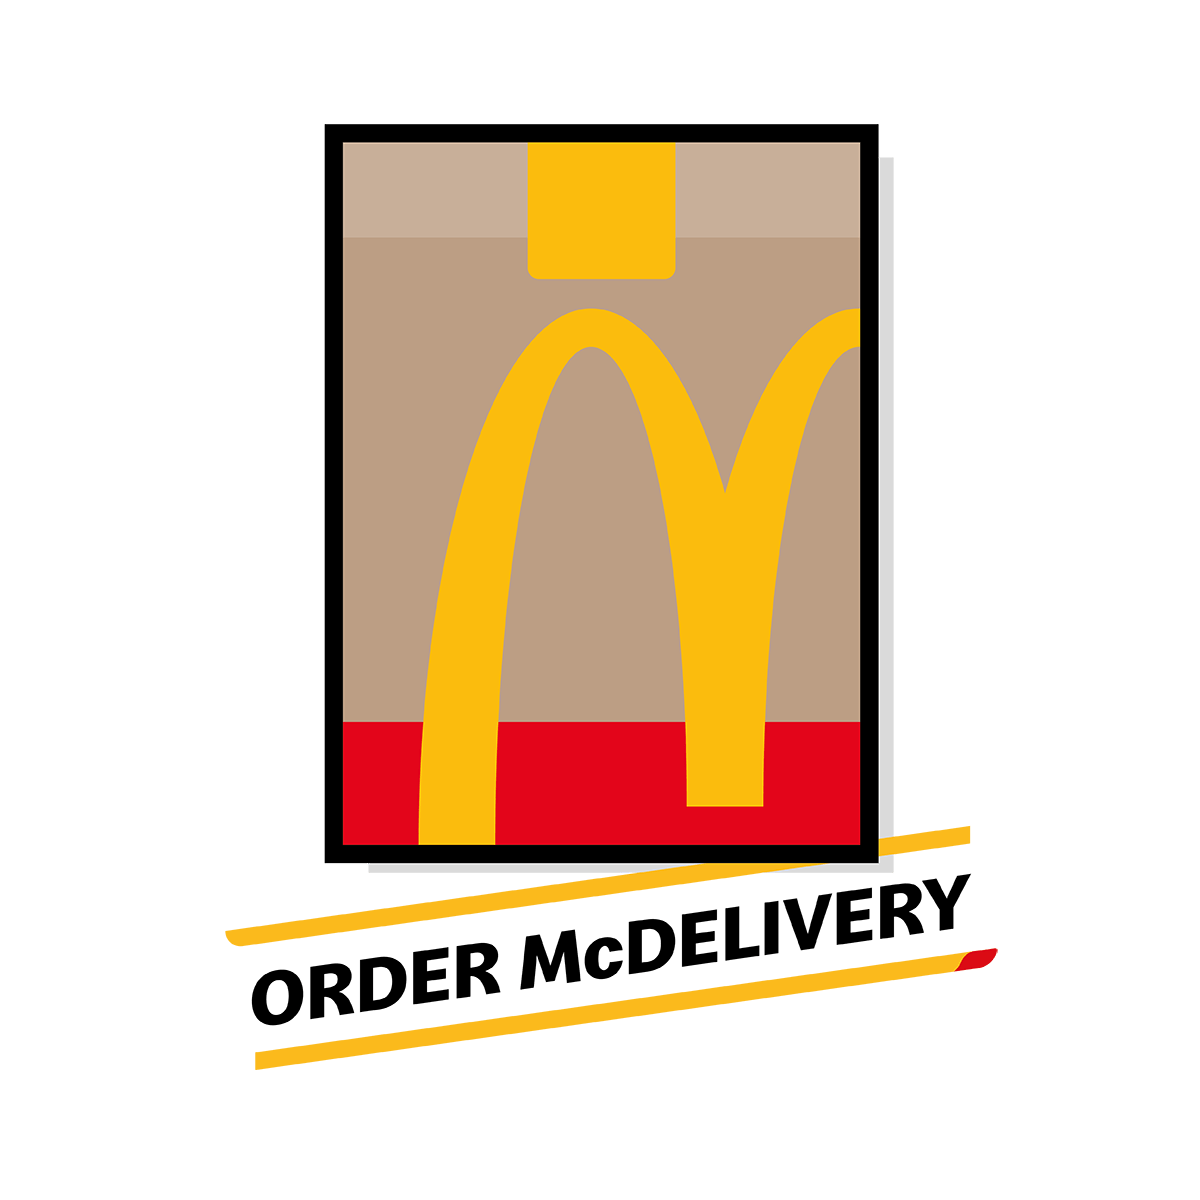 Privileges McDelivery